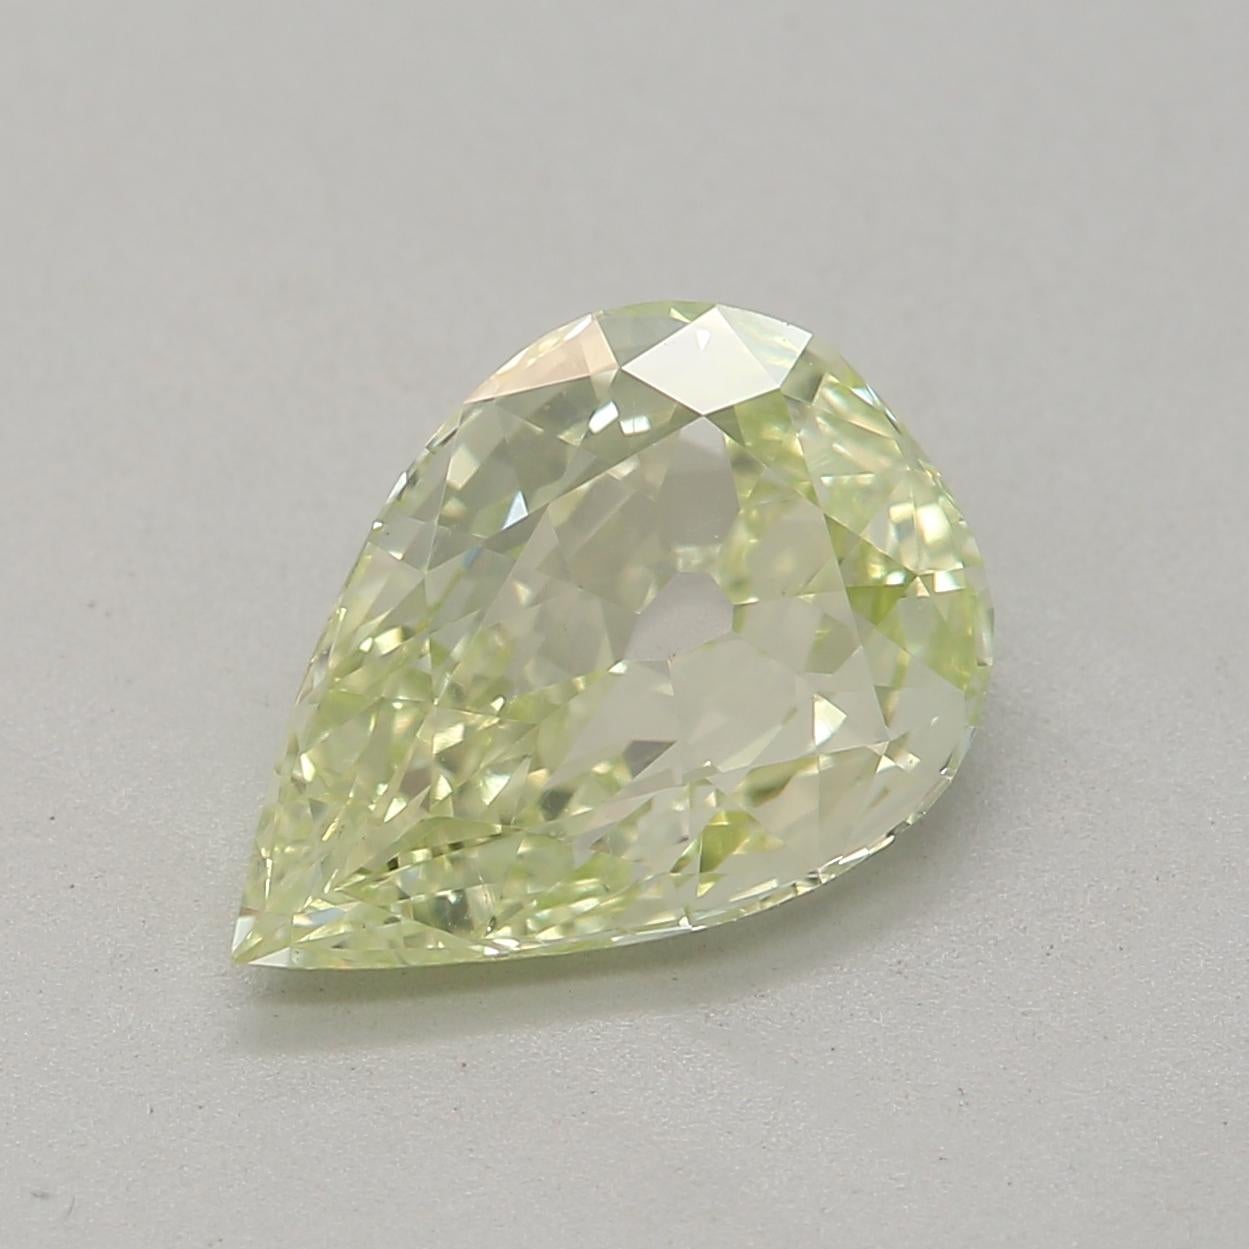 *100% NATURAL FANCY COLOUR DIAMOND*

✪ Diamond Details ✪

➛ Shape: Pear
➛ Colour Grade: Fancy Yellow Green 
➛ Carat: 1.03
➛ Clarity: Si1
➛ GIA Certified 

^FEATURES OF THE DIAMOND^

This pear cut diamond is a unique and elegant shape that resembles